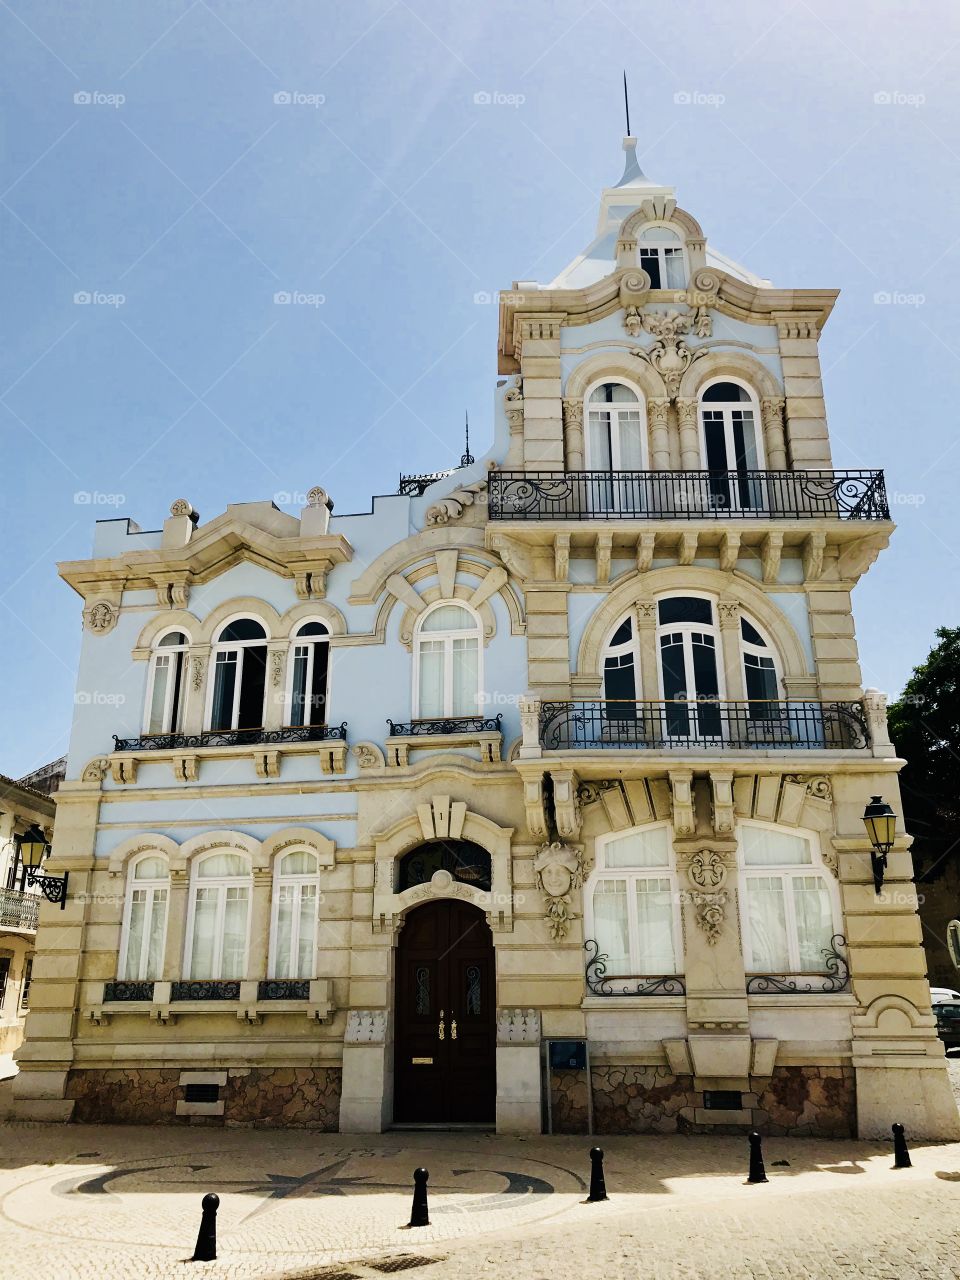 House in the city of Faro, Portugal. Reminded me of something from Alice in wonderland